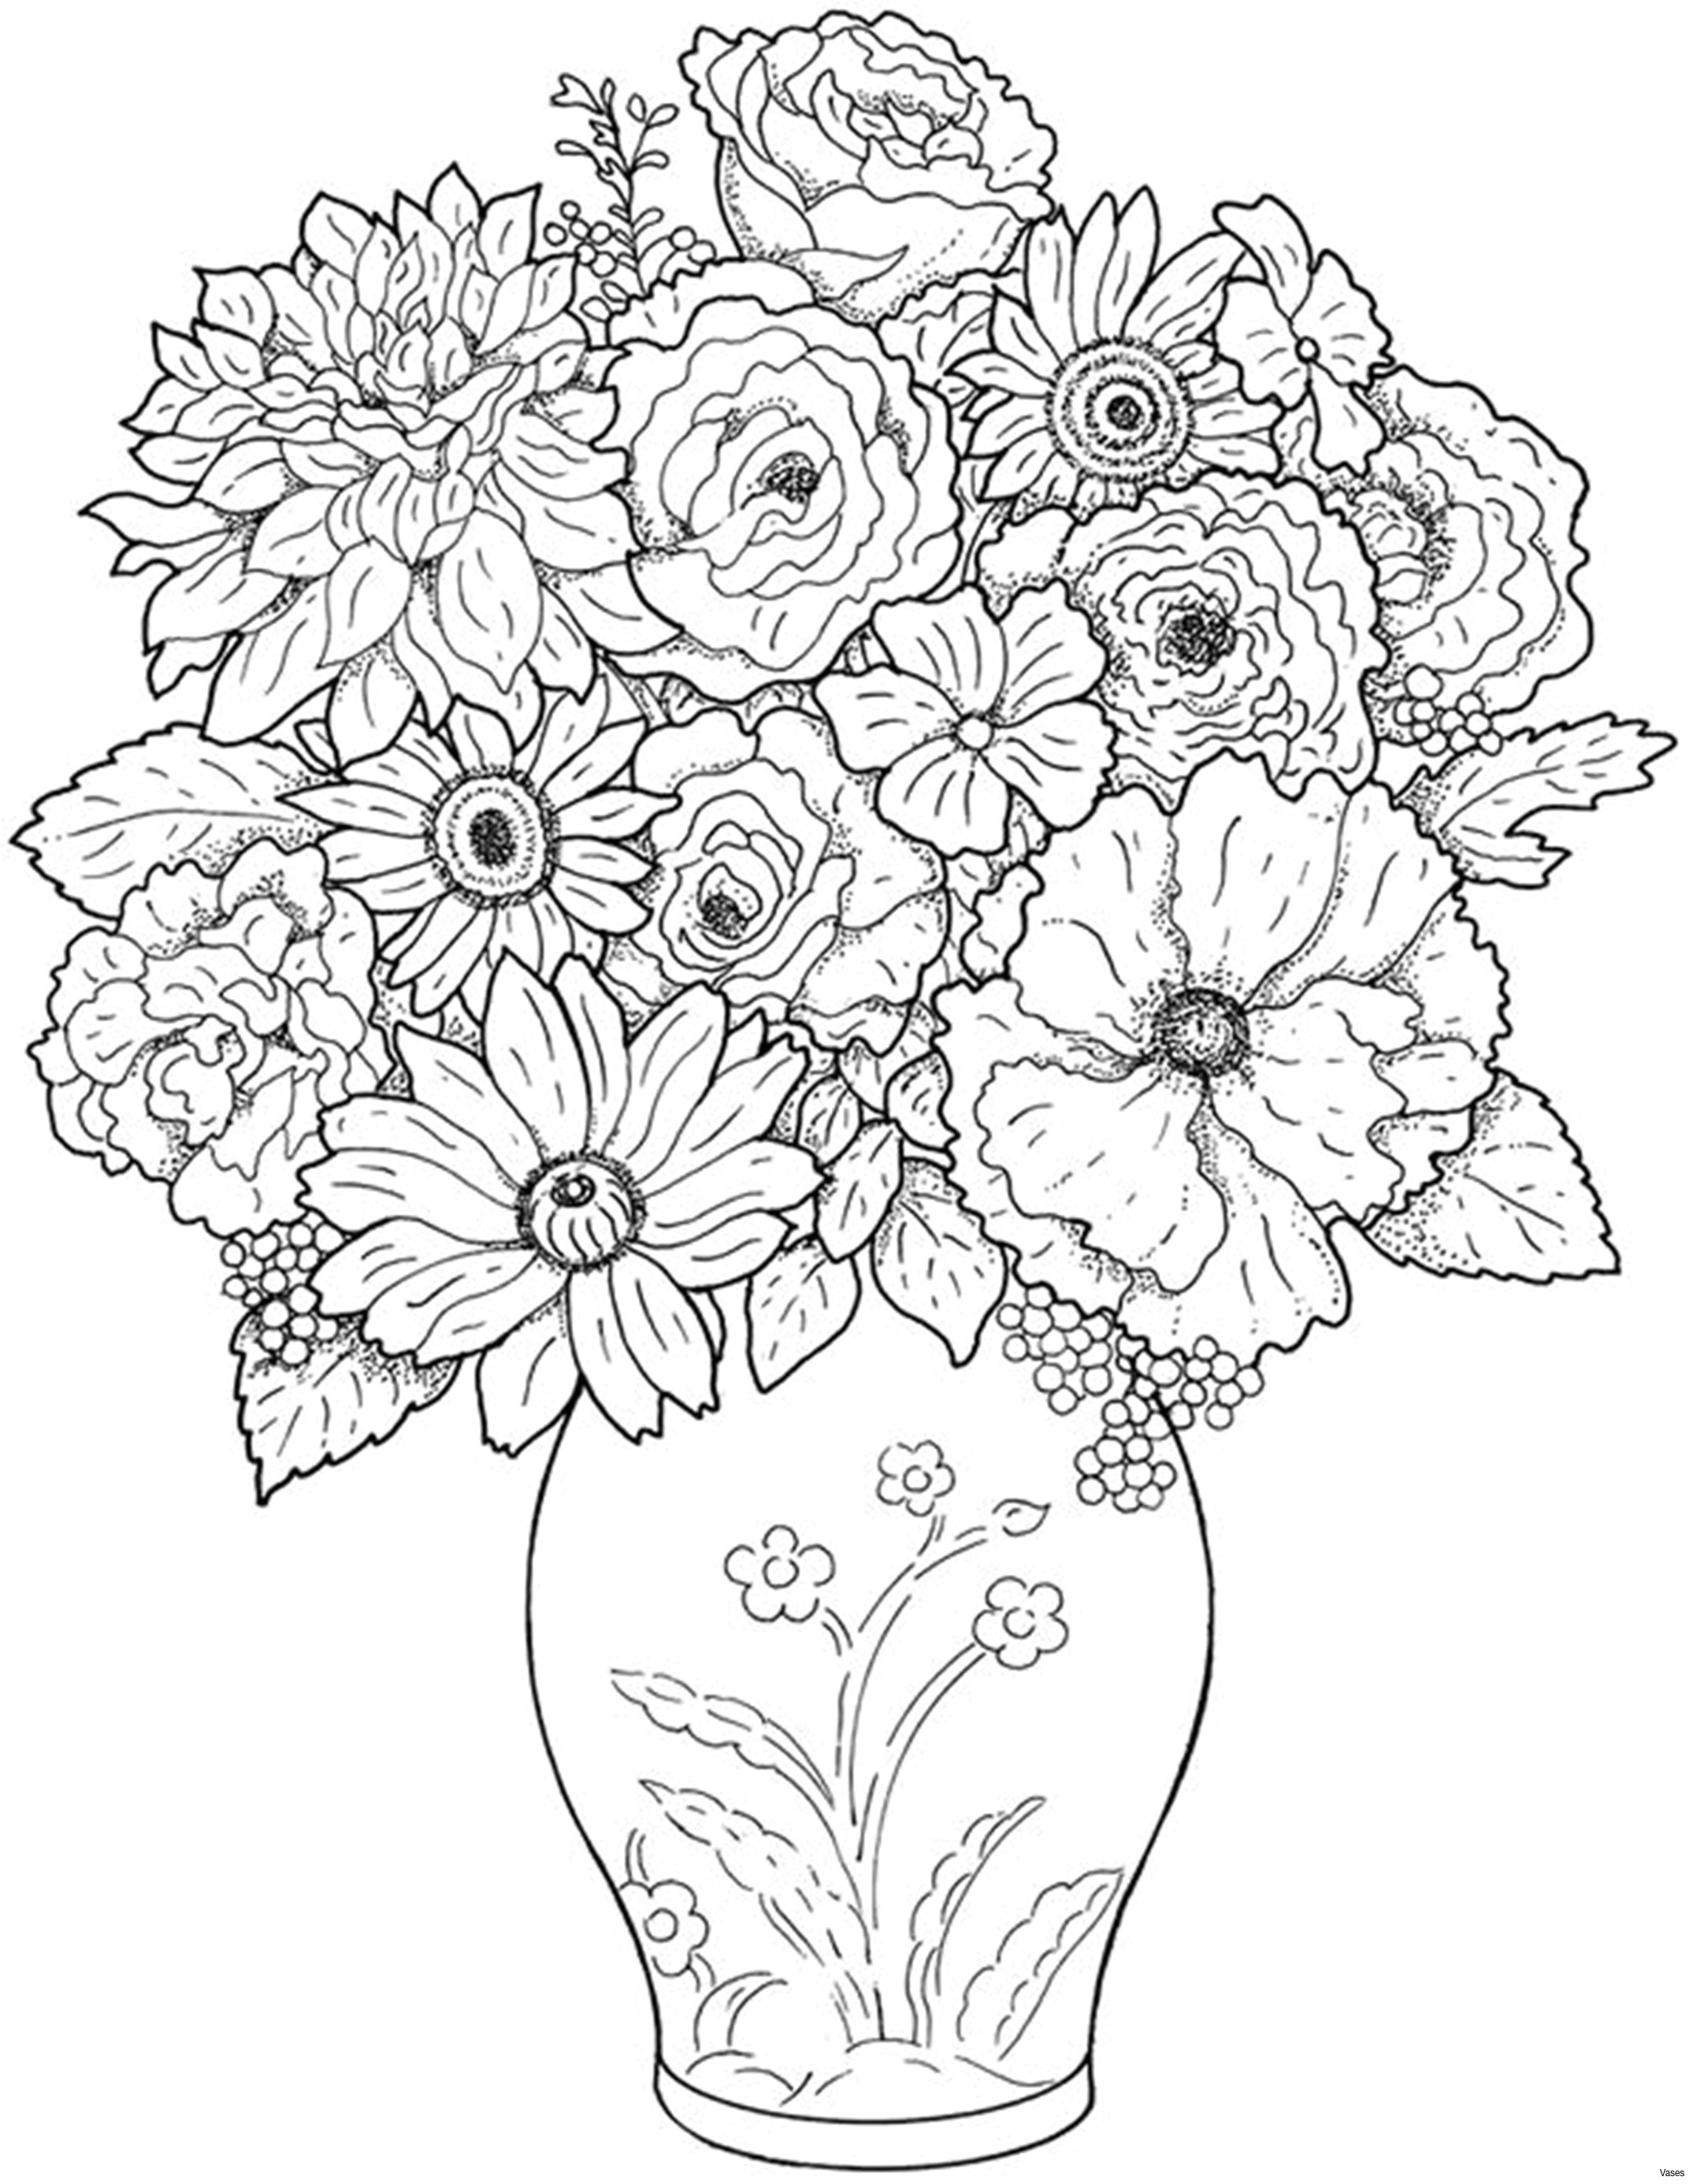 Drawing Pictures Of Flowers In A Vase Www Colouring Pages Aua Ergewohnliche Cool Vases Flower Vase Coloring